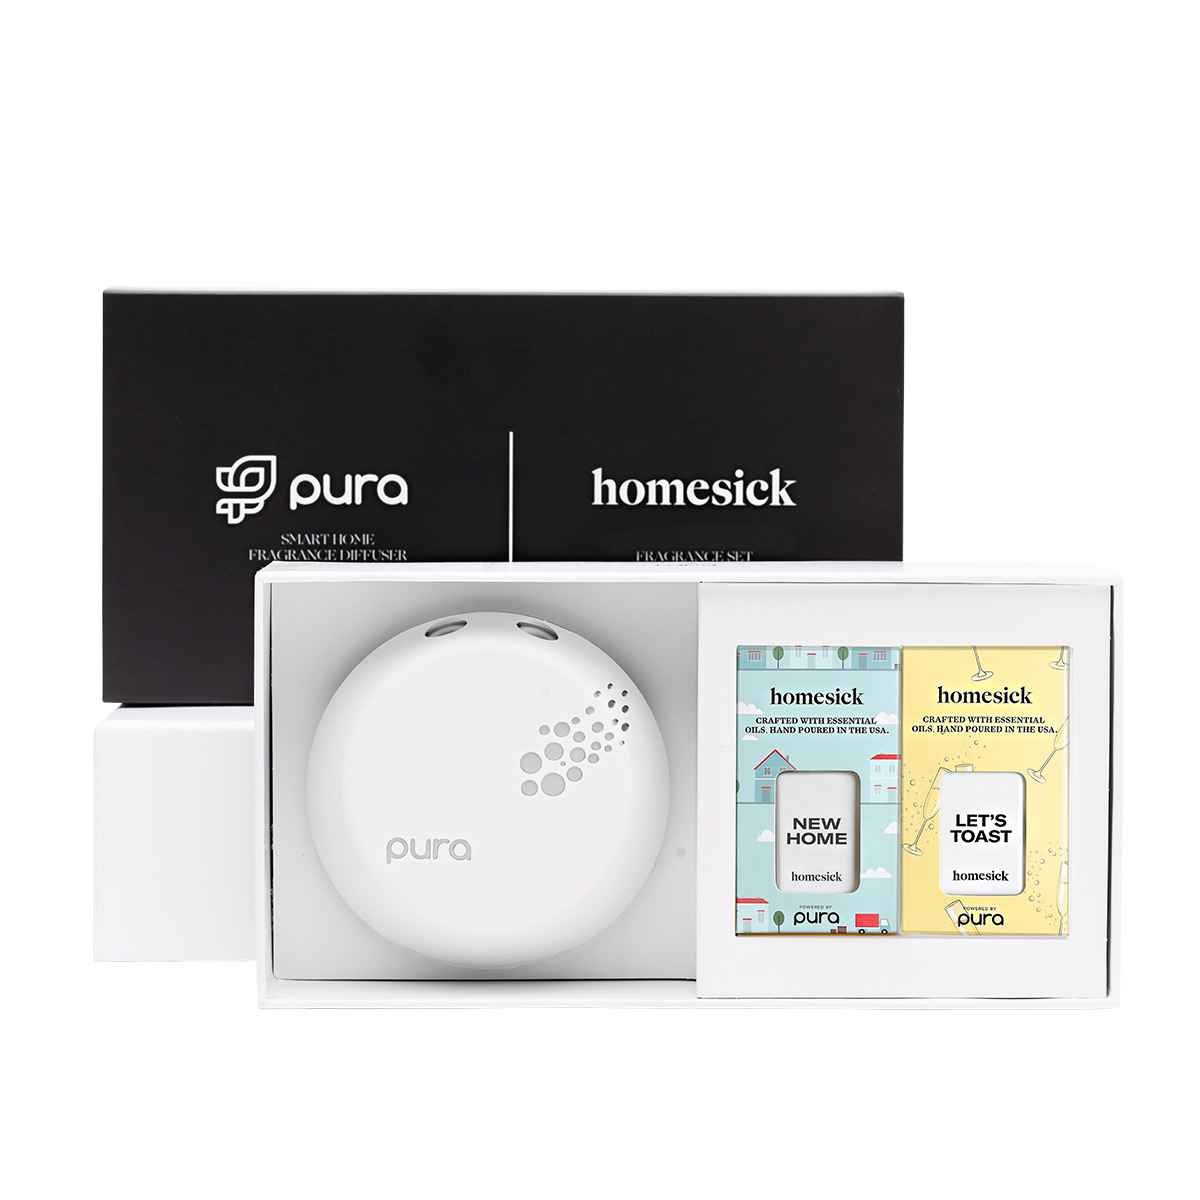 Homesick x Pura Smart Home Fragrance Diffuser Bundle | The Container Store